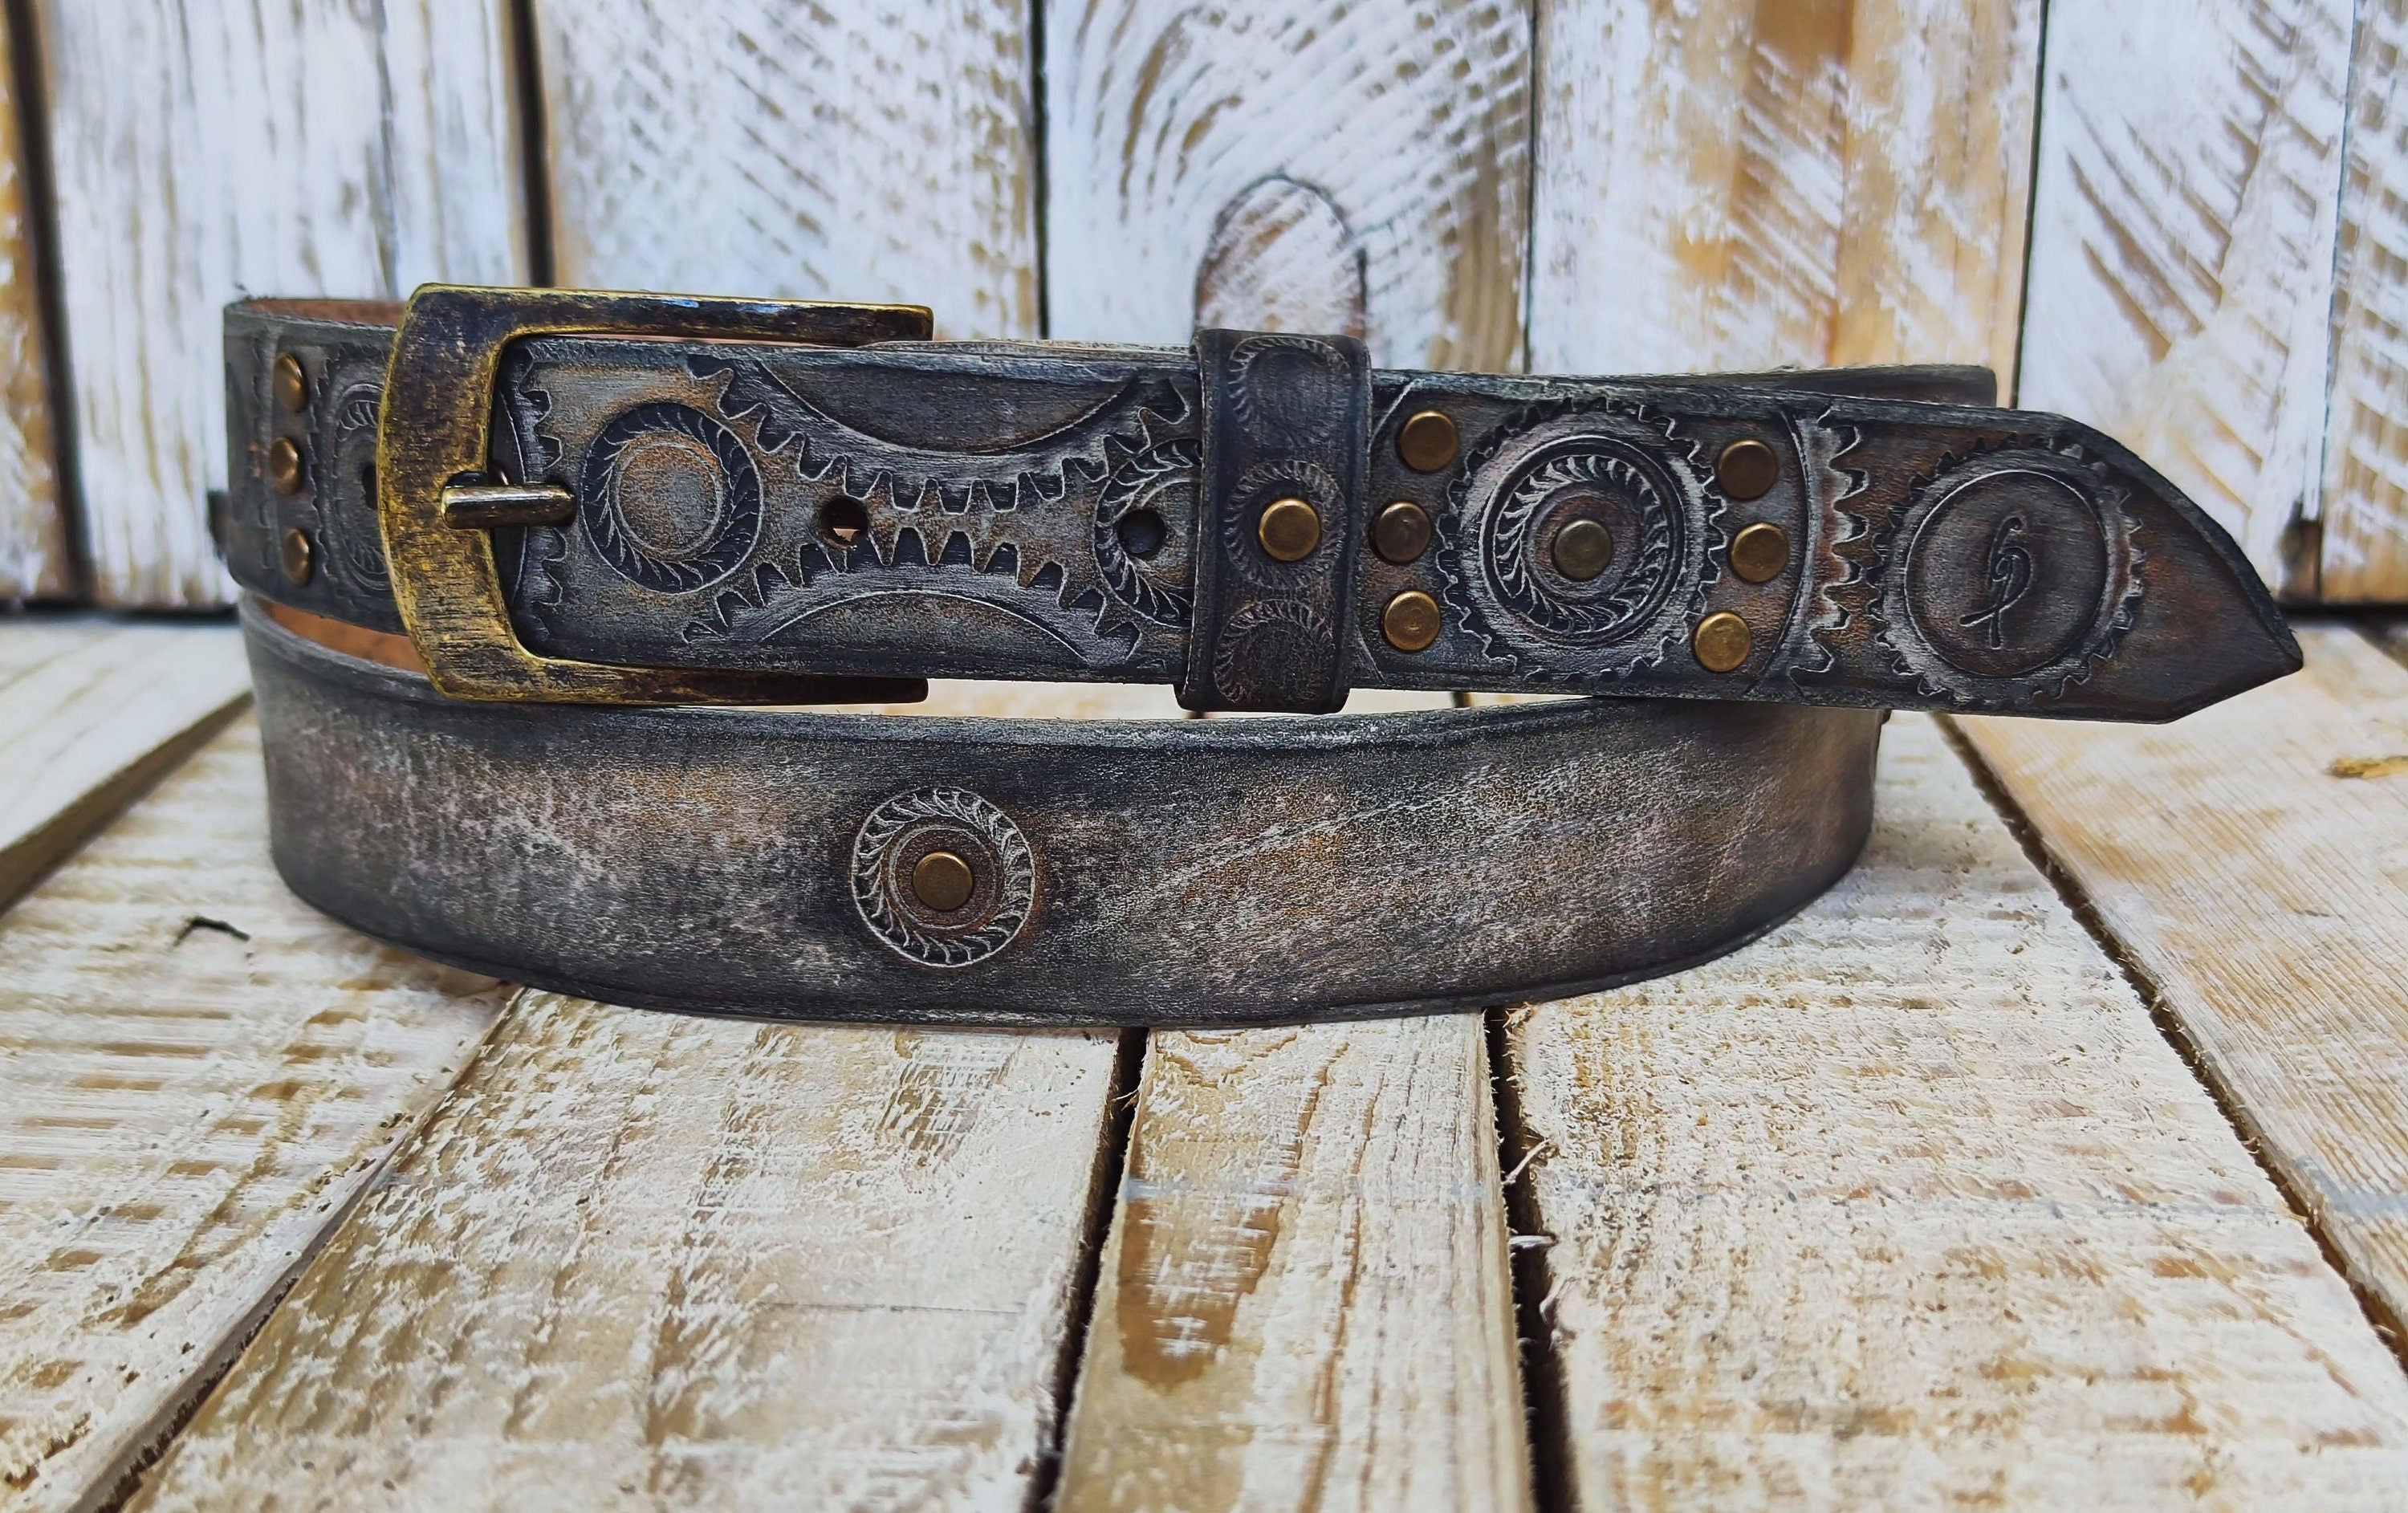 Rugged Handmade Leather Belt: white and Vintage brown Wash designed with Motorcycle Gear Stamps, and studs.